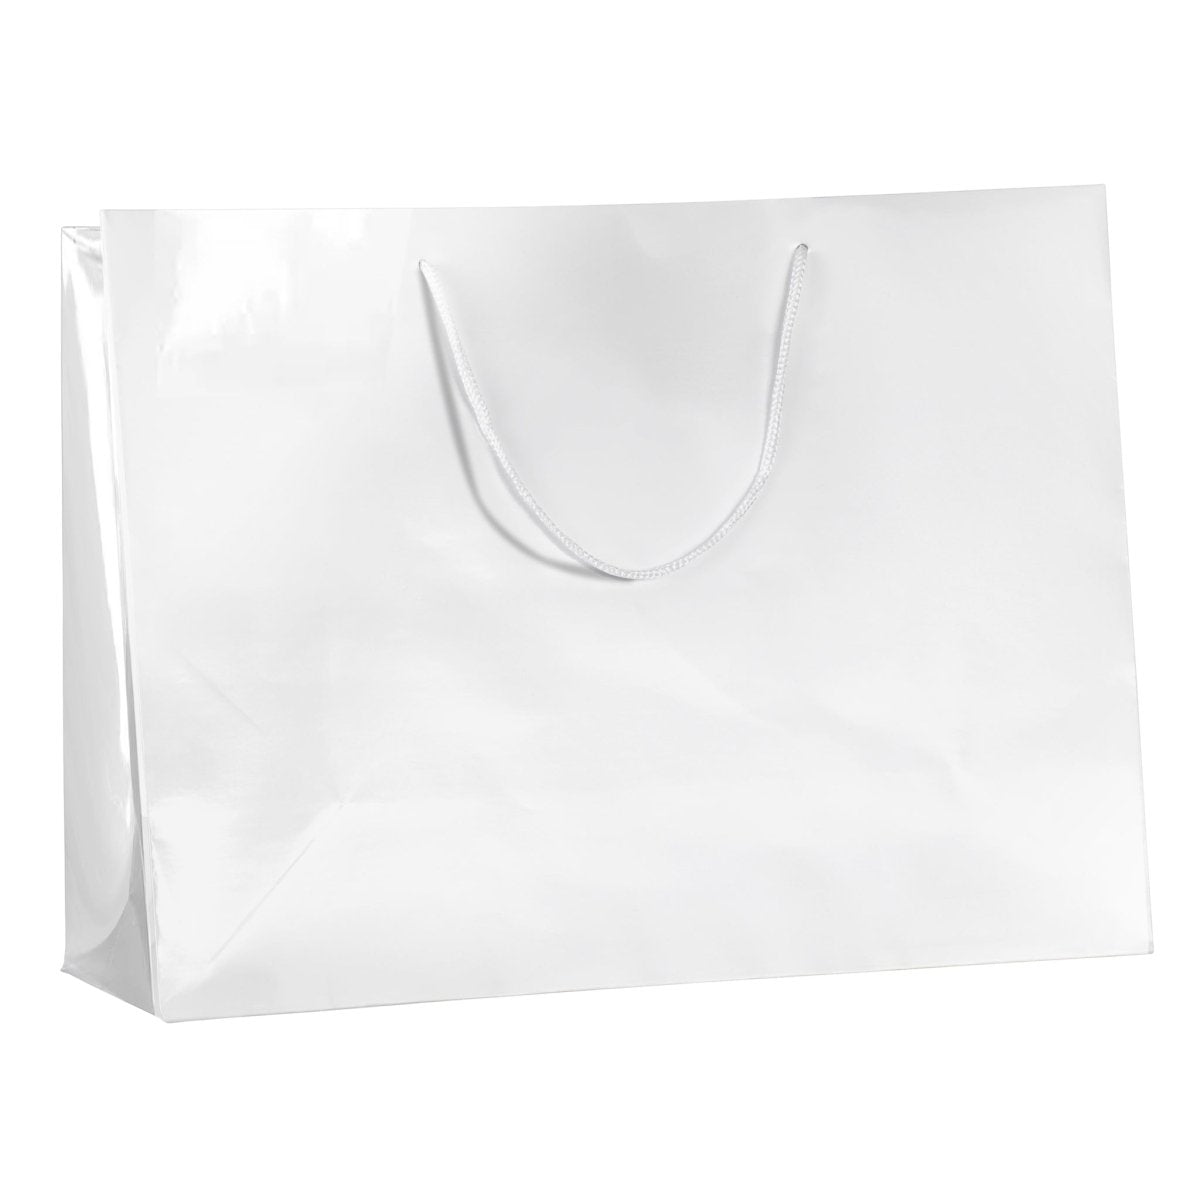 Laminated Glossy Shopping Bag - 16 x 6 x 12 - Prestige and Fancy - White